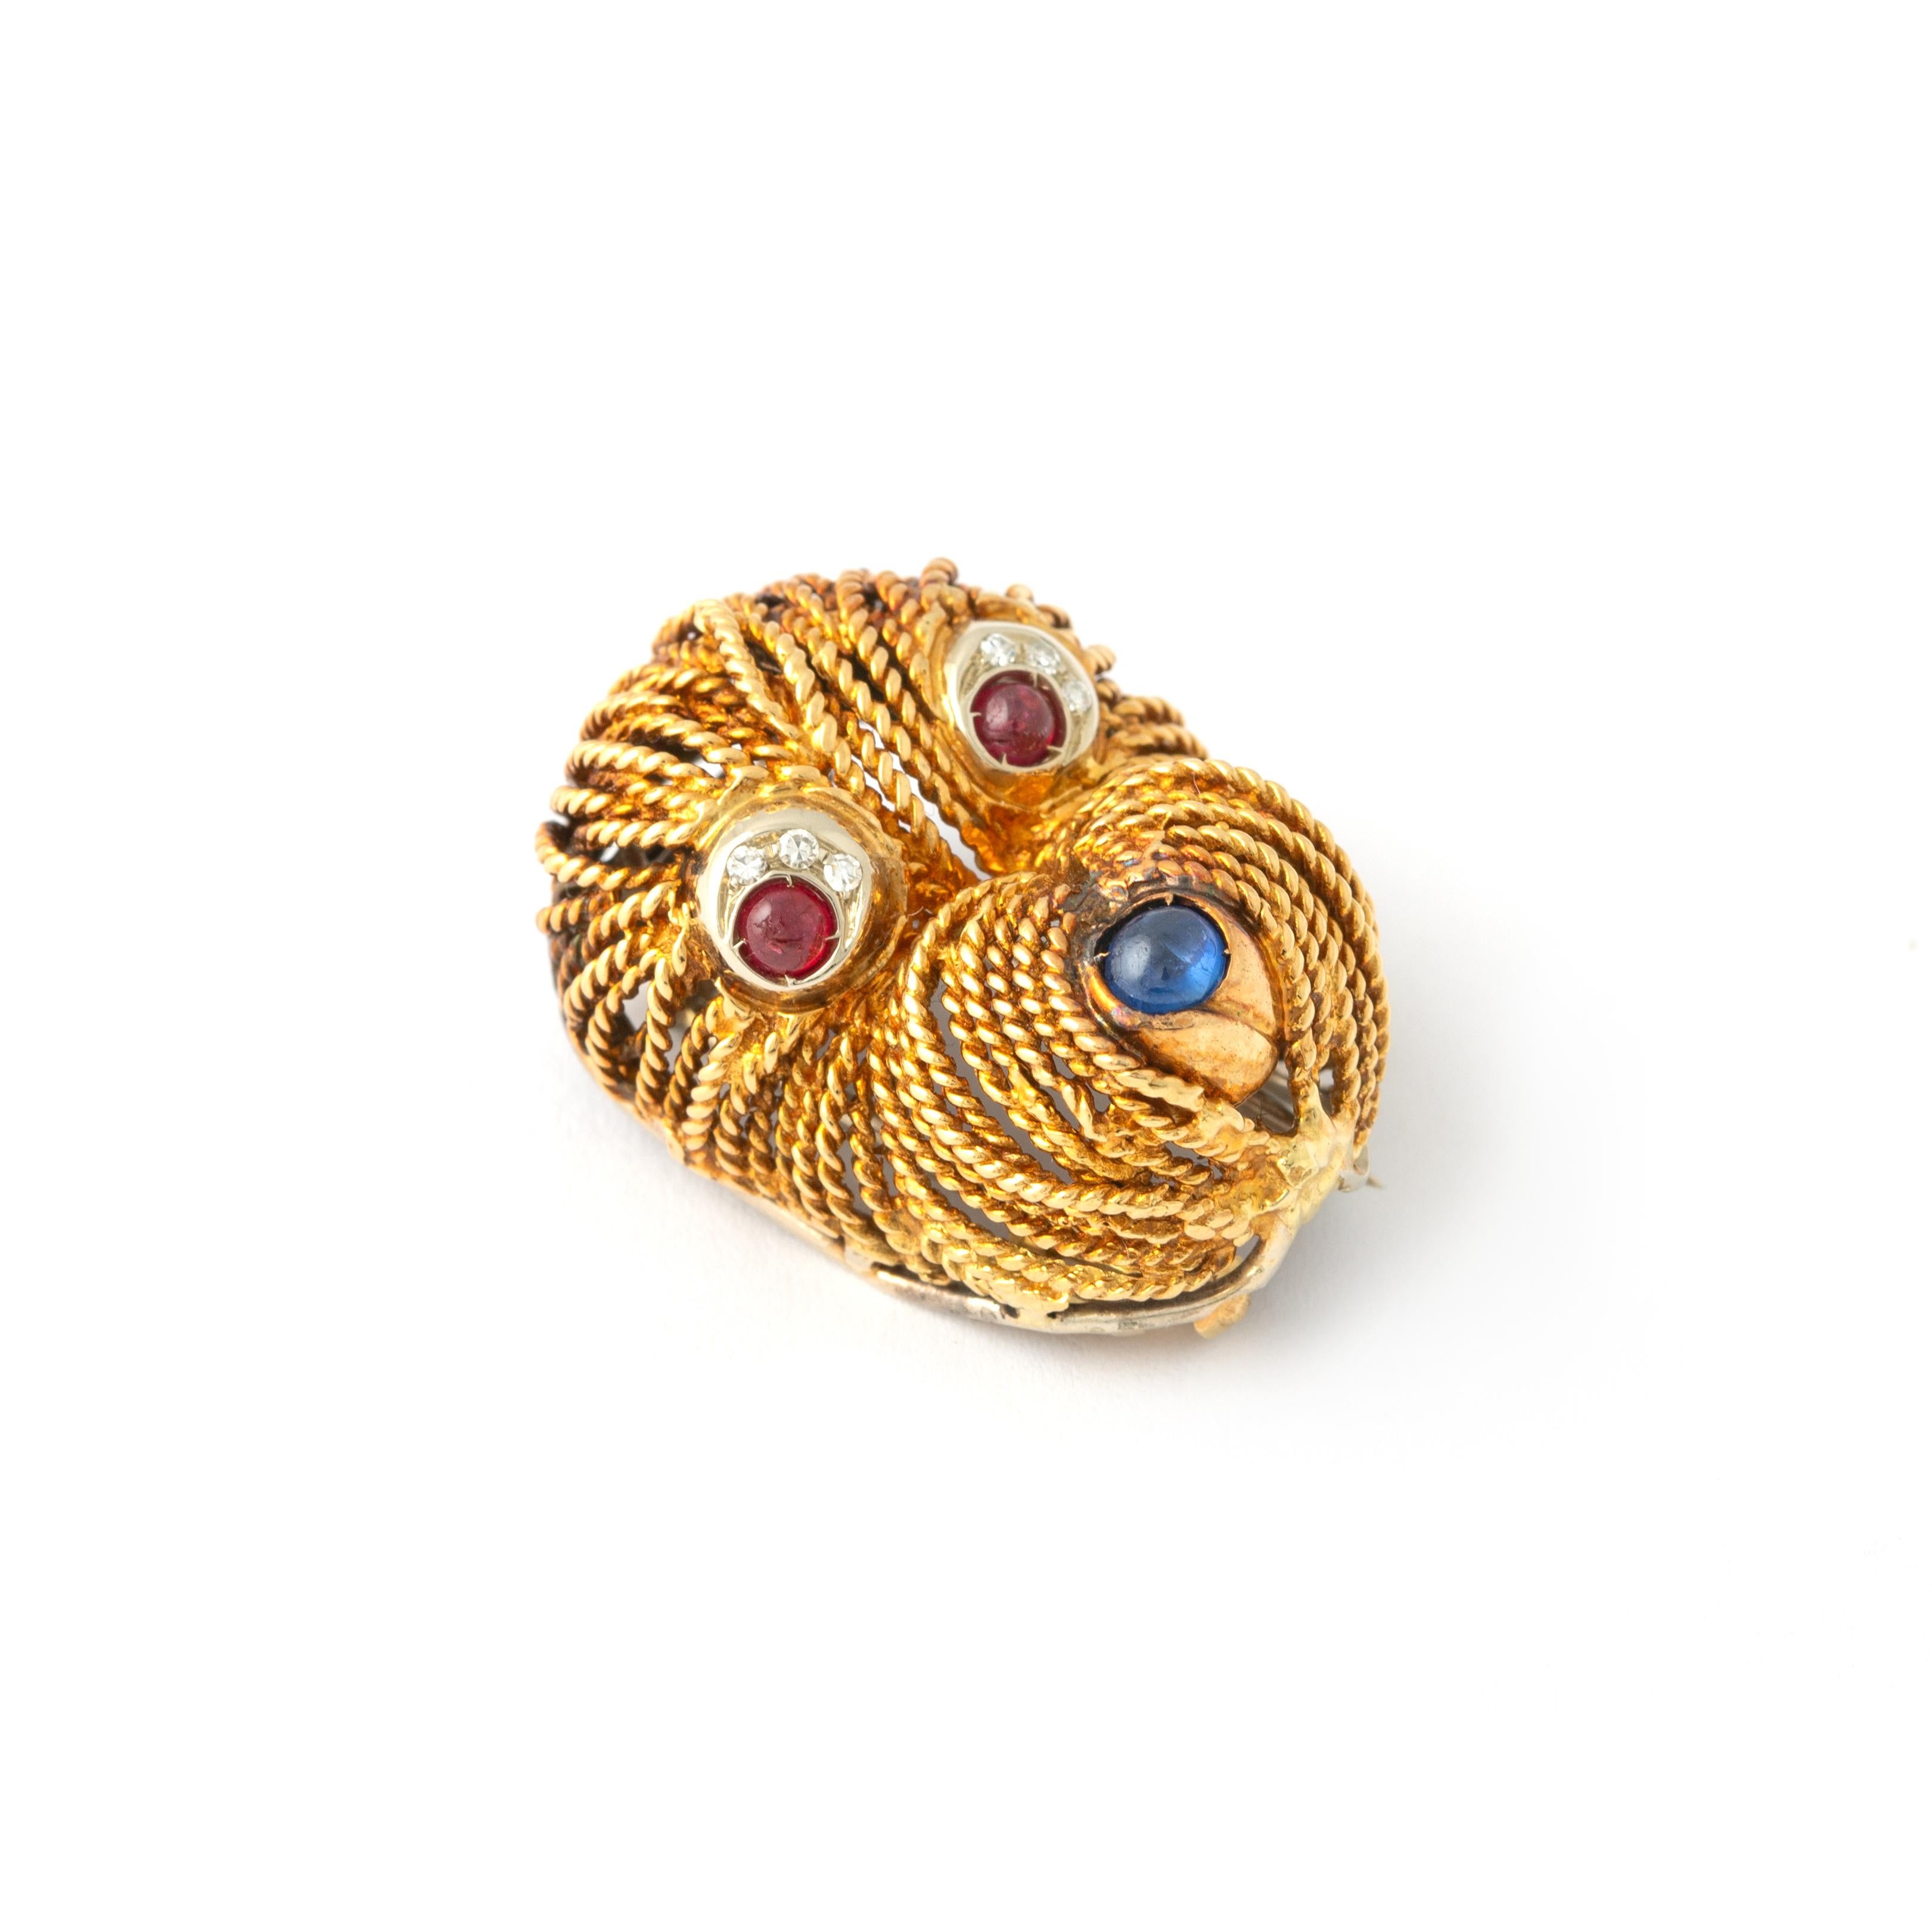 A lovely dog's head Brooch in yellow gold 18K set by round diamonds, cabochon ruby eyes and sapphire on the nose.
Italian work.
Circa 1960.
Total length: 2.60 centimeters.
Total width: 2.00 centimeters.
Total thickness: 1.65 centimeters.

Total